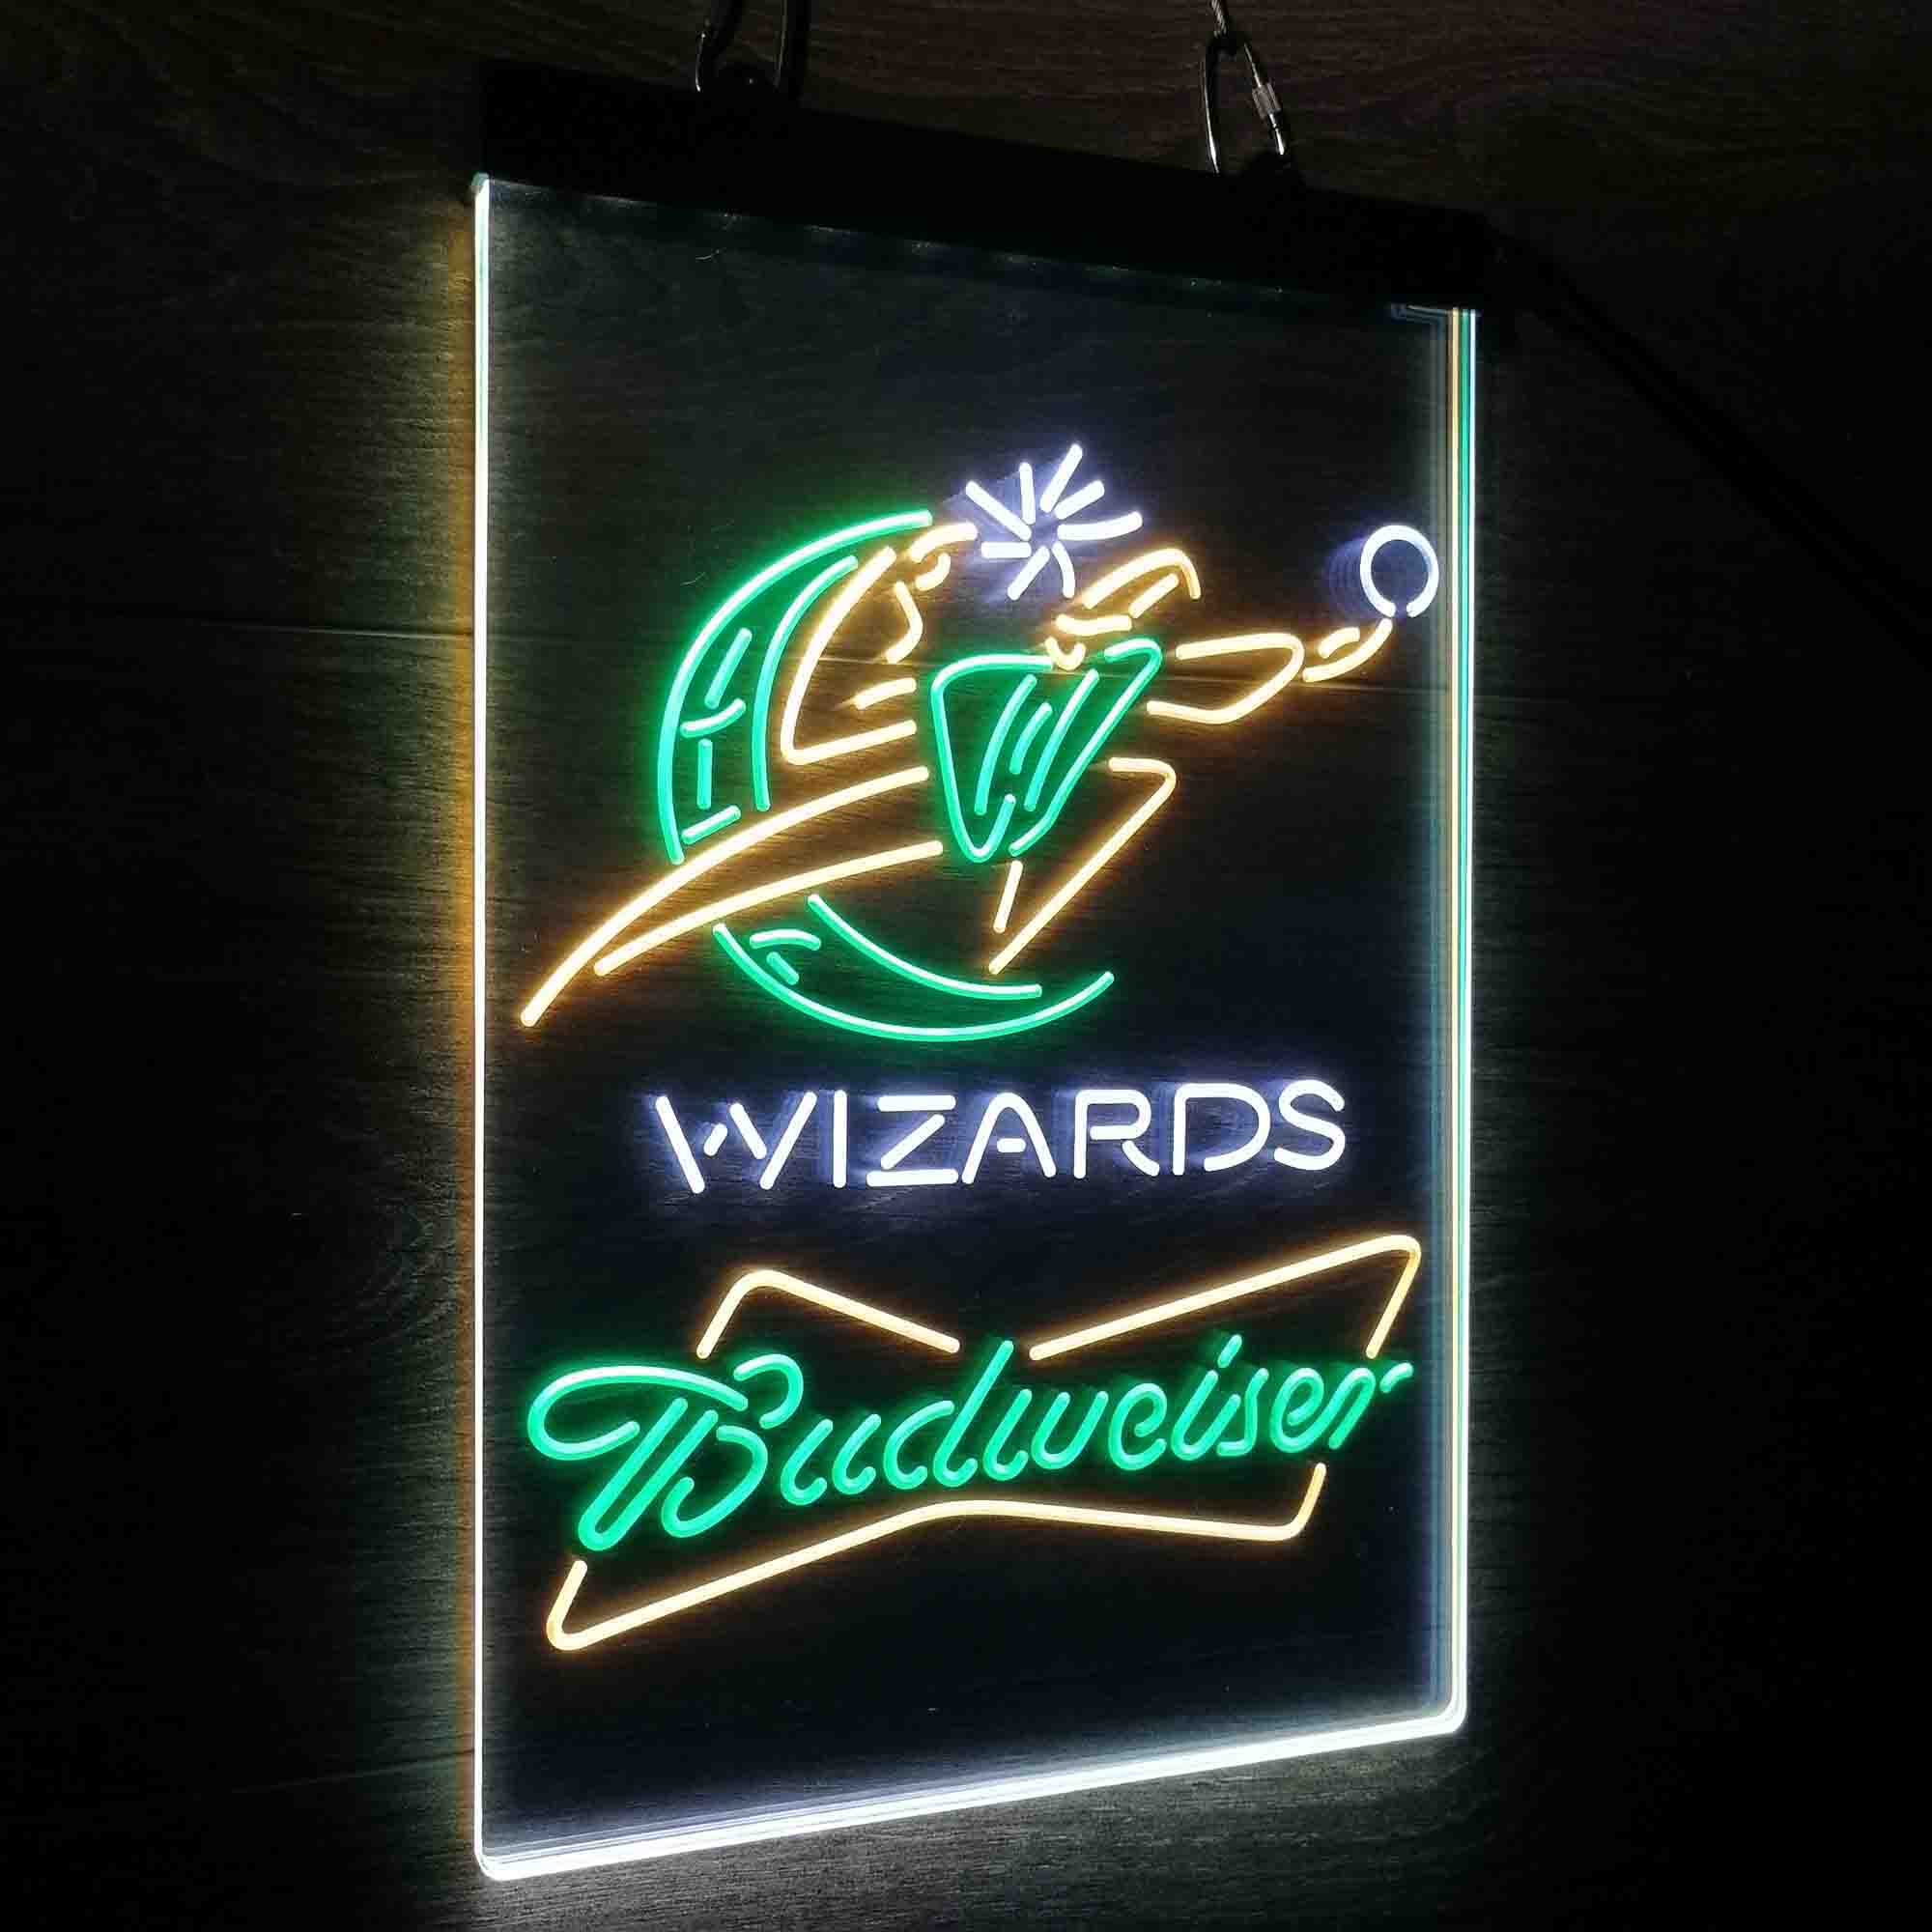 Wizards Nba Budweiser Neon LED Sign 3 Colors